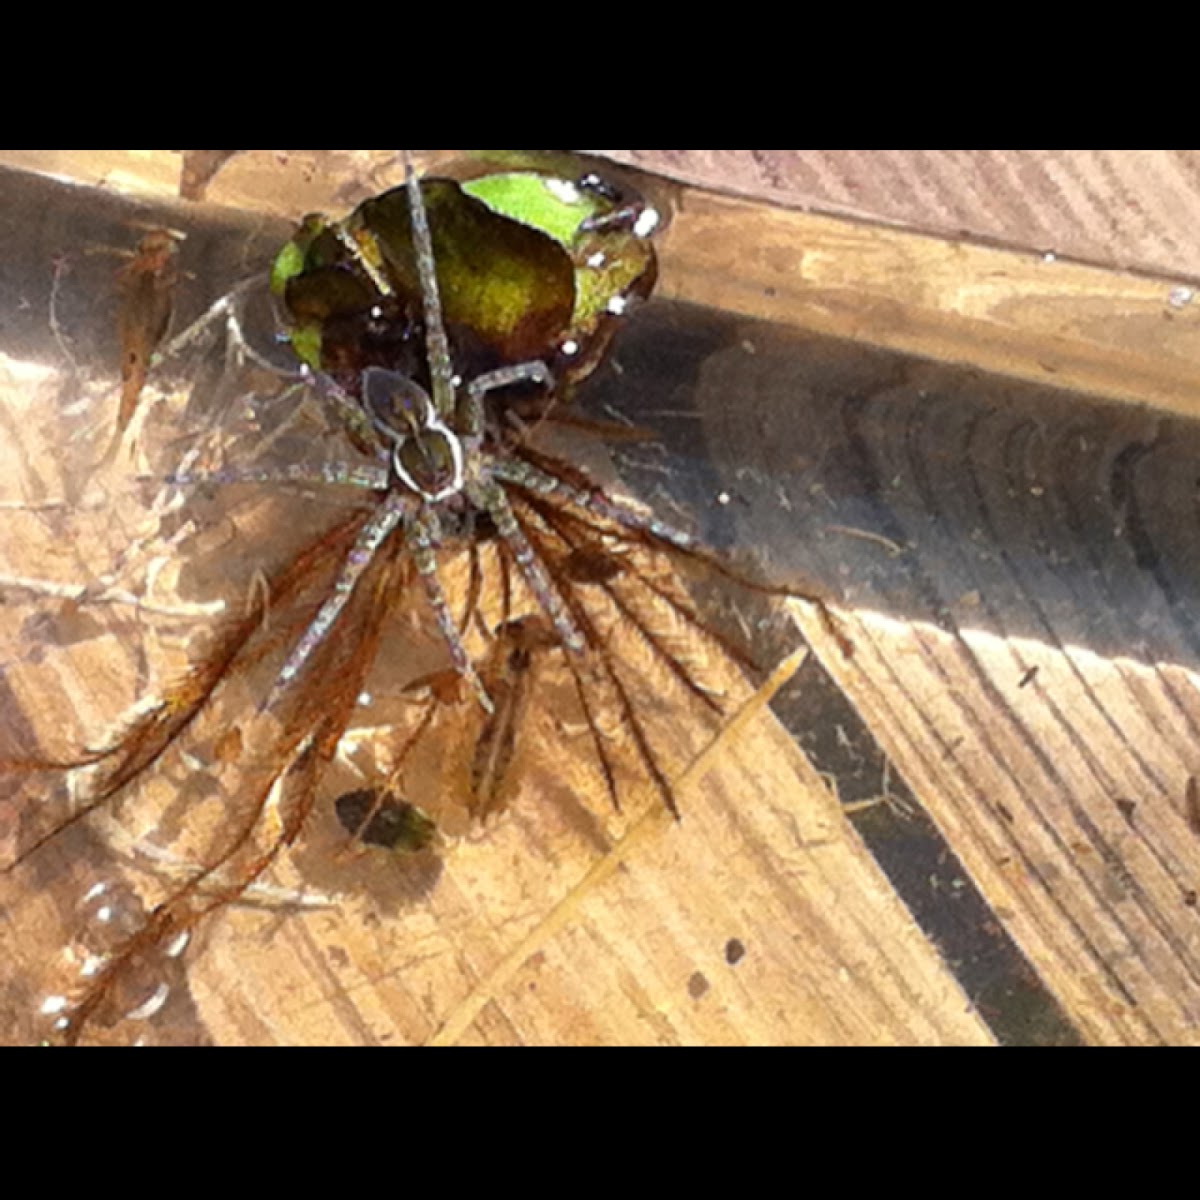 Six-spotted Fishing Spider